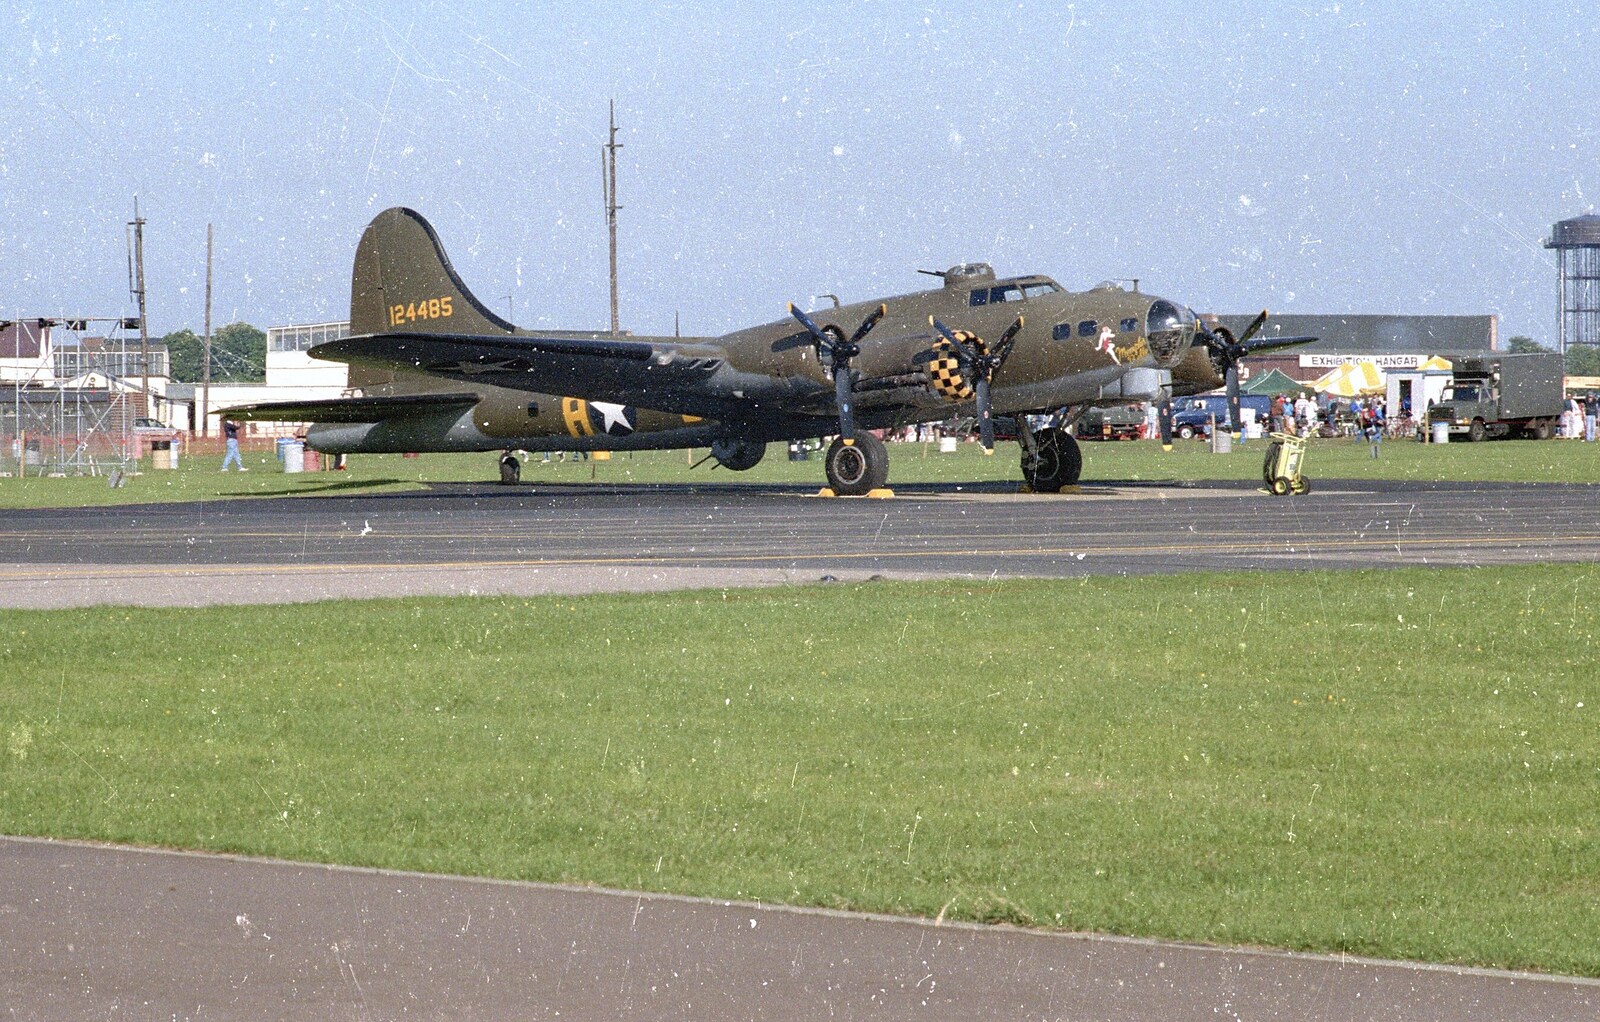 B17 'Sally B' from The Mildenhall Air Fete, Mildenhall, Suffolk - 29th May 1994